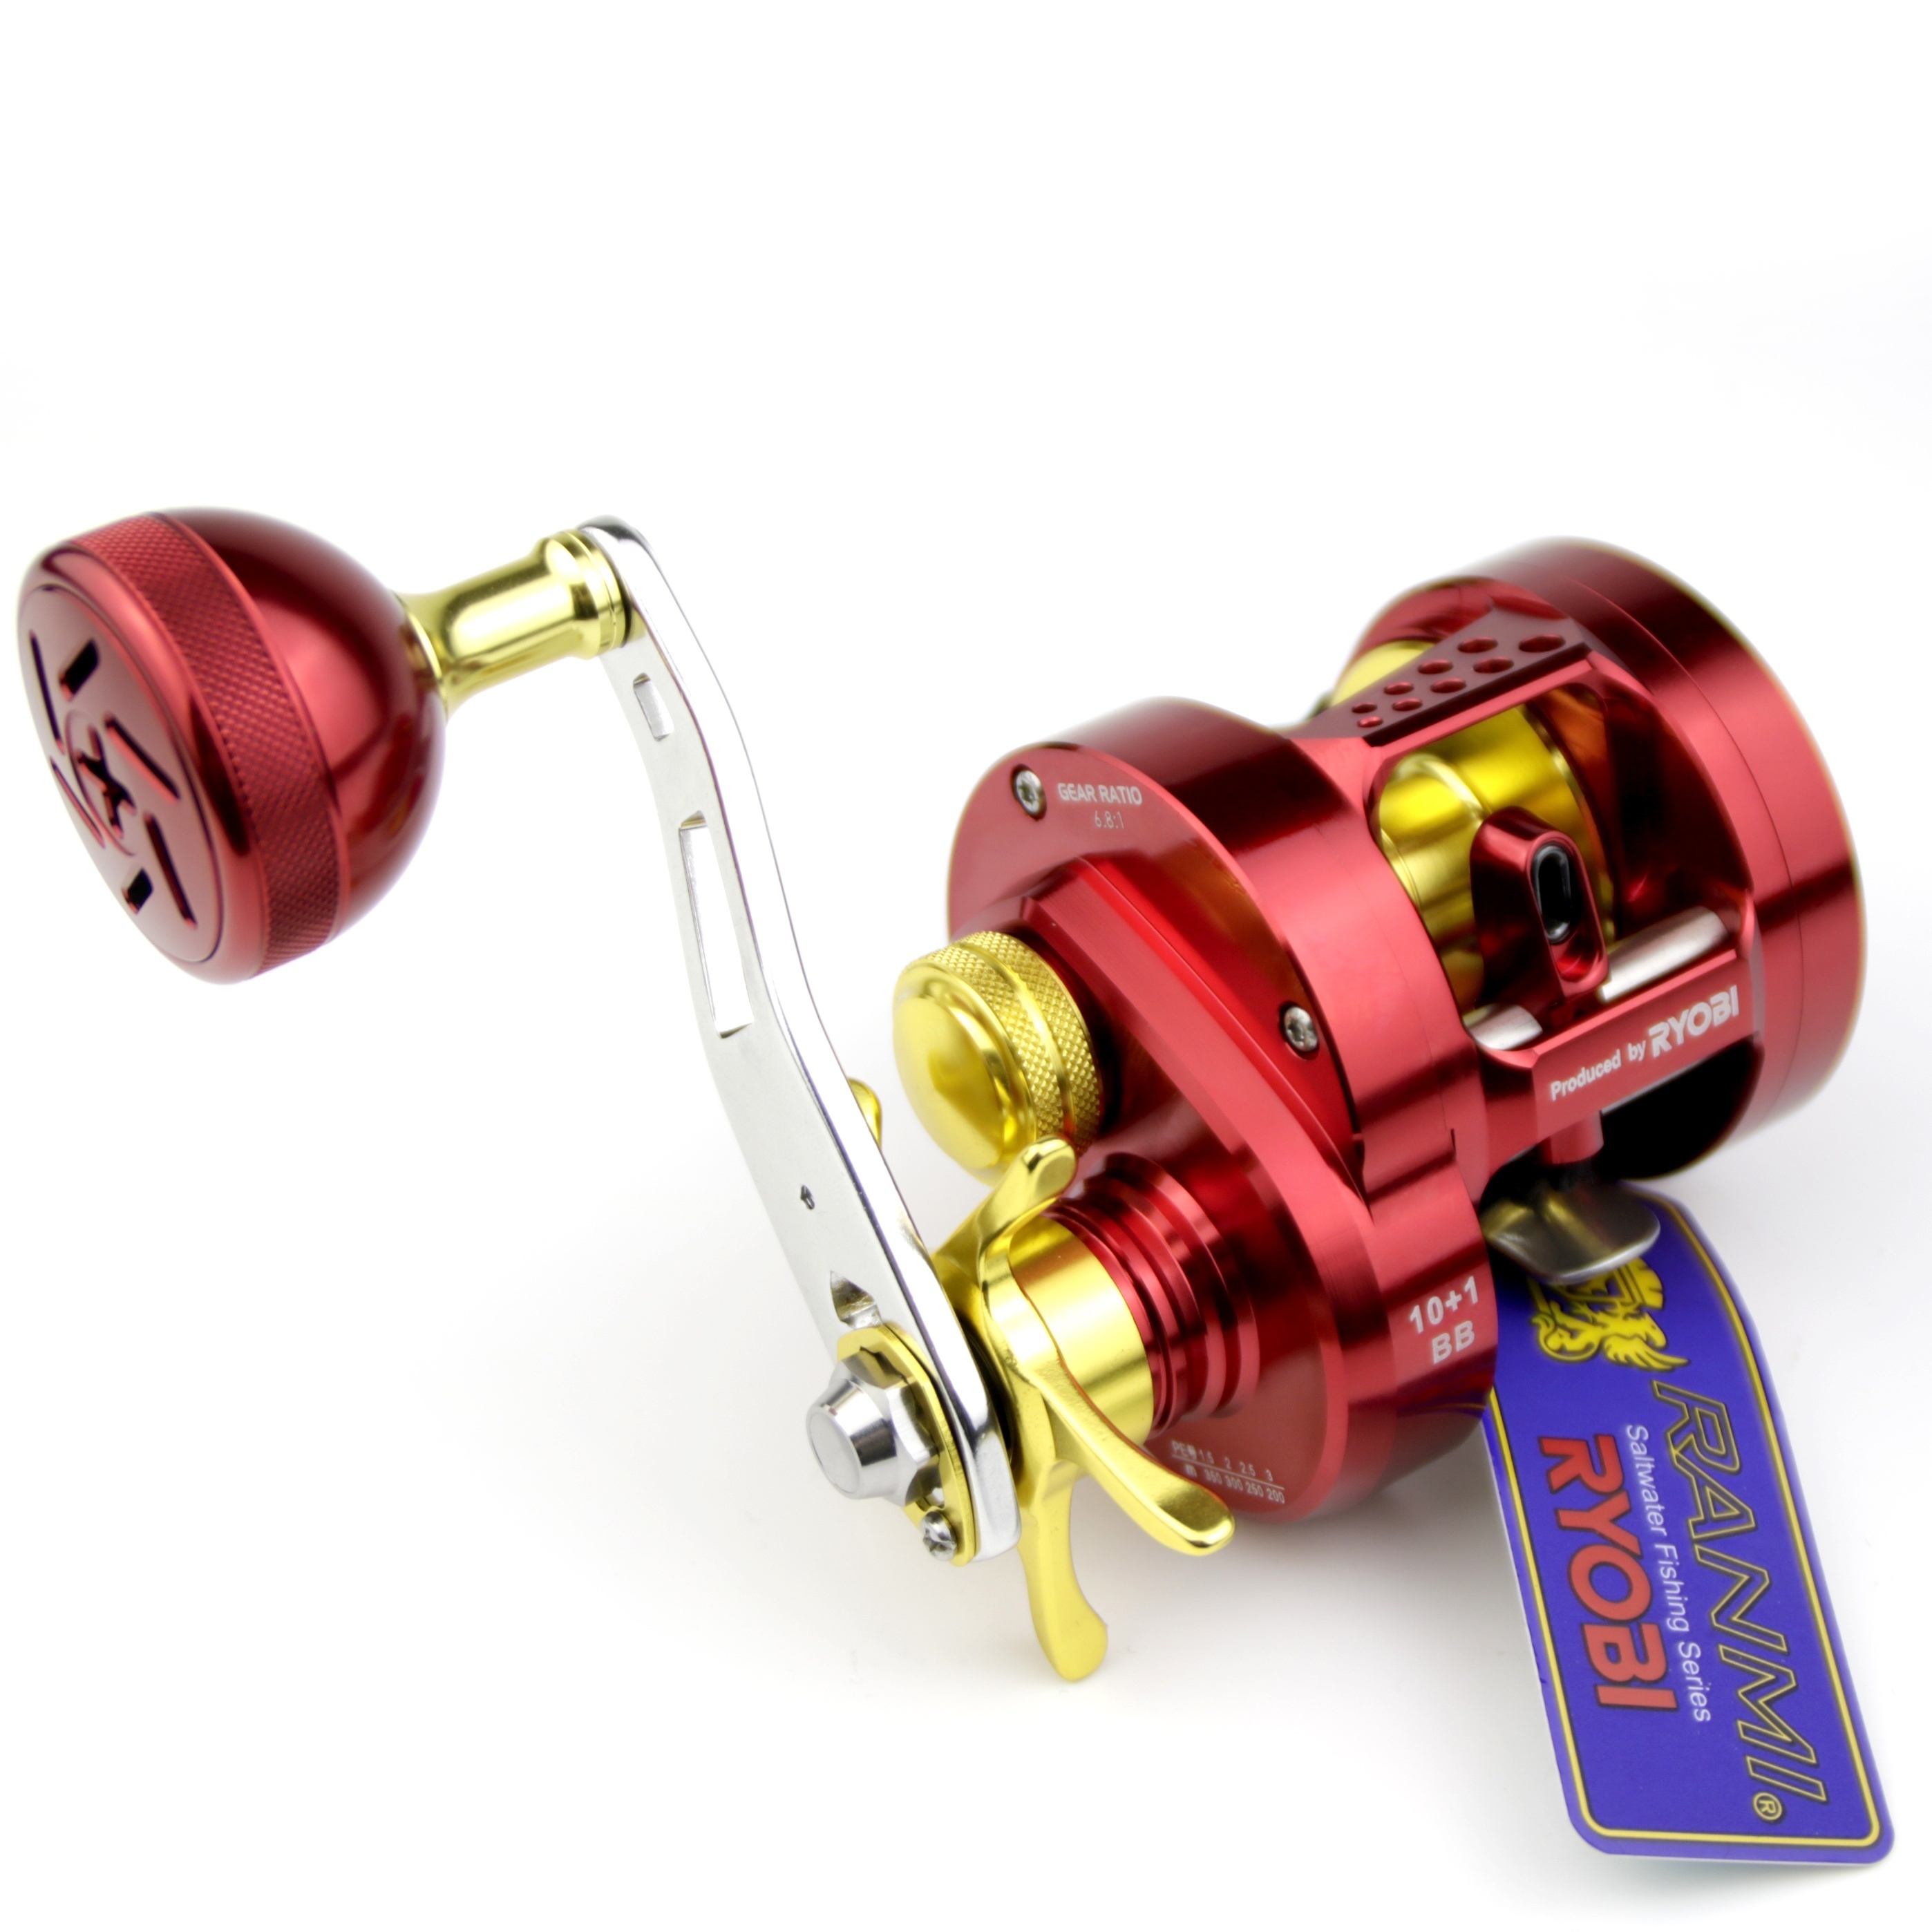 CLOSE OUT**RYOBI SLOW PITCH JIGGING REEL, RT HAND, FREE SHIPPING, IN STOCK